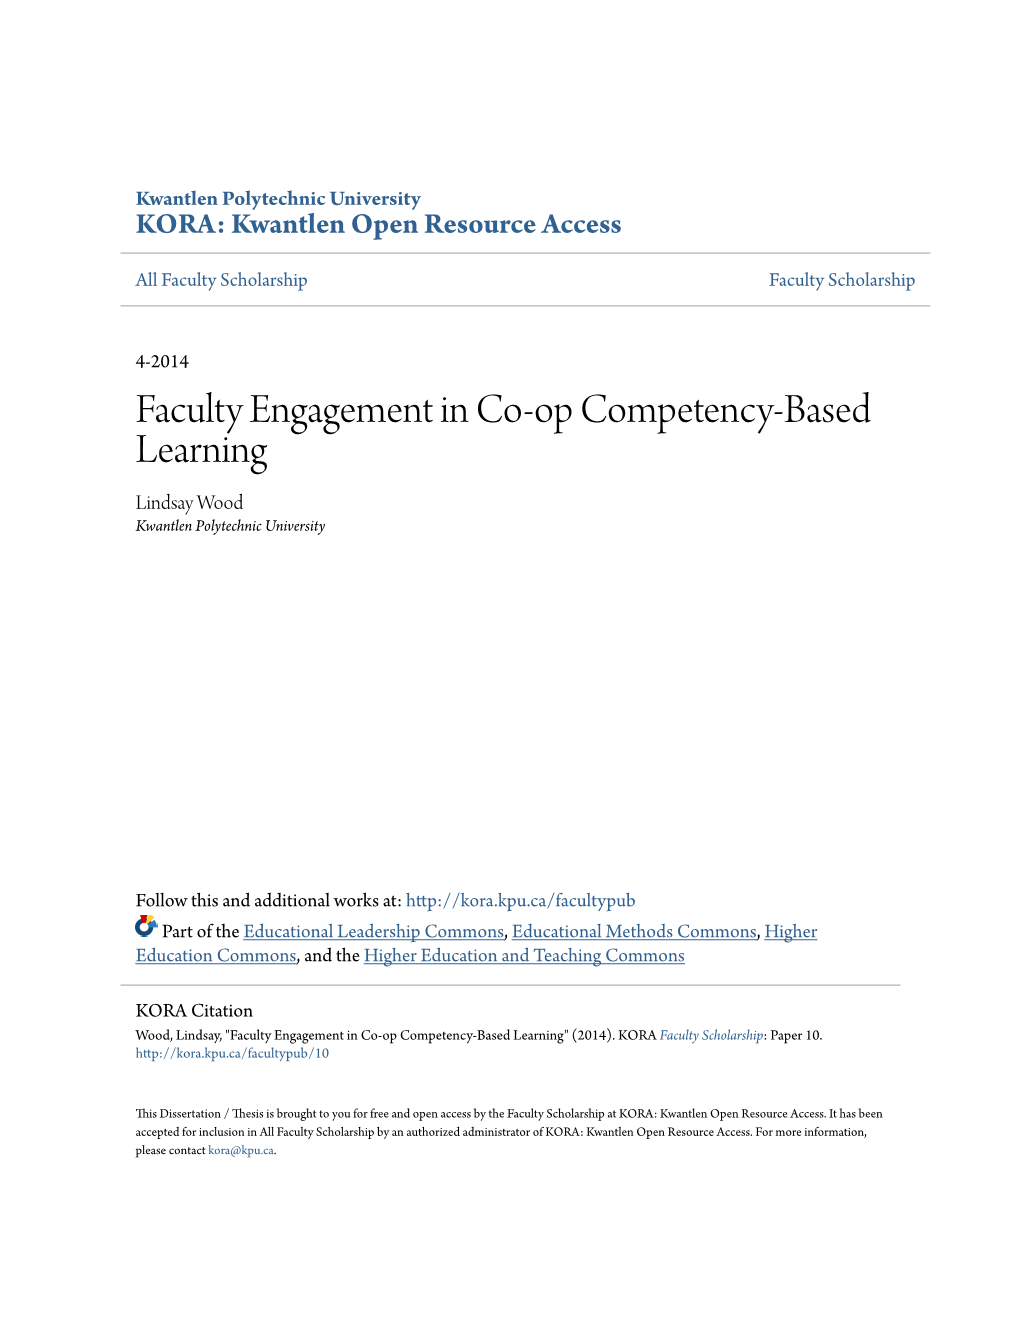 Faculty Engagement in Co-Op Competency-Based Learning Lindsay Wood Kwantlen Polytechnic University